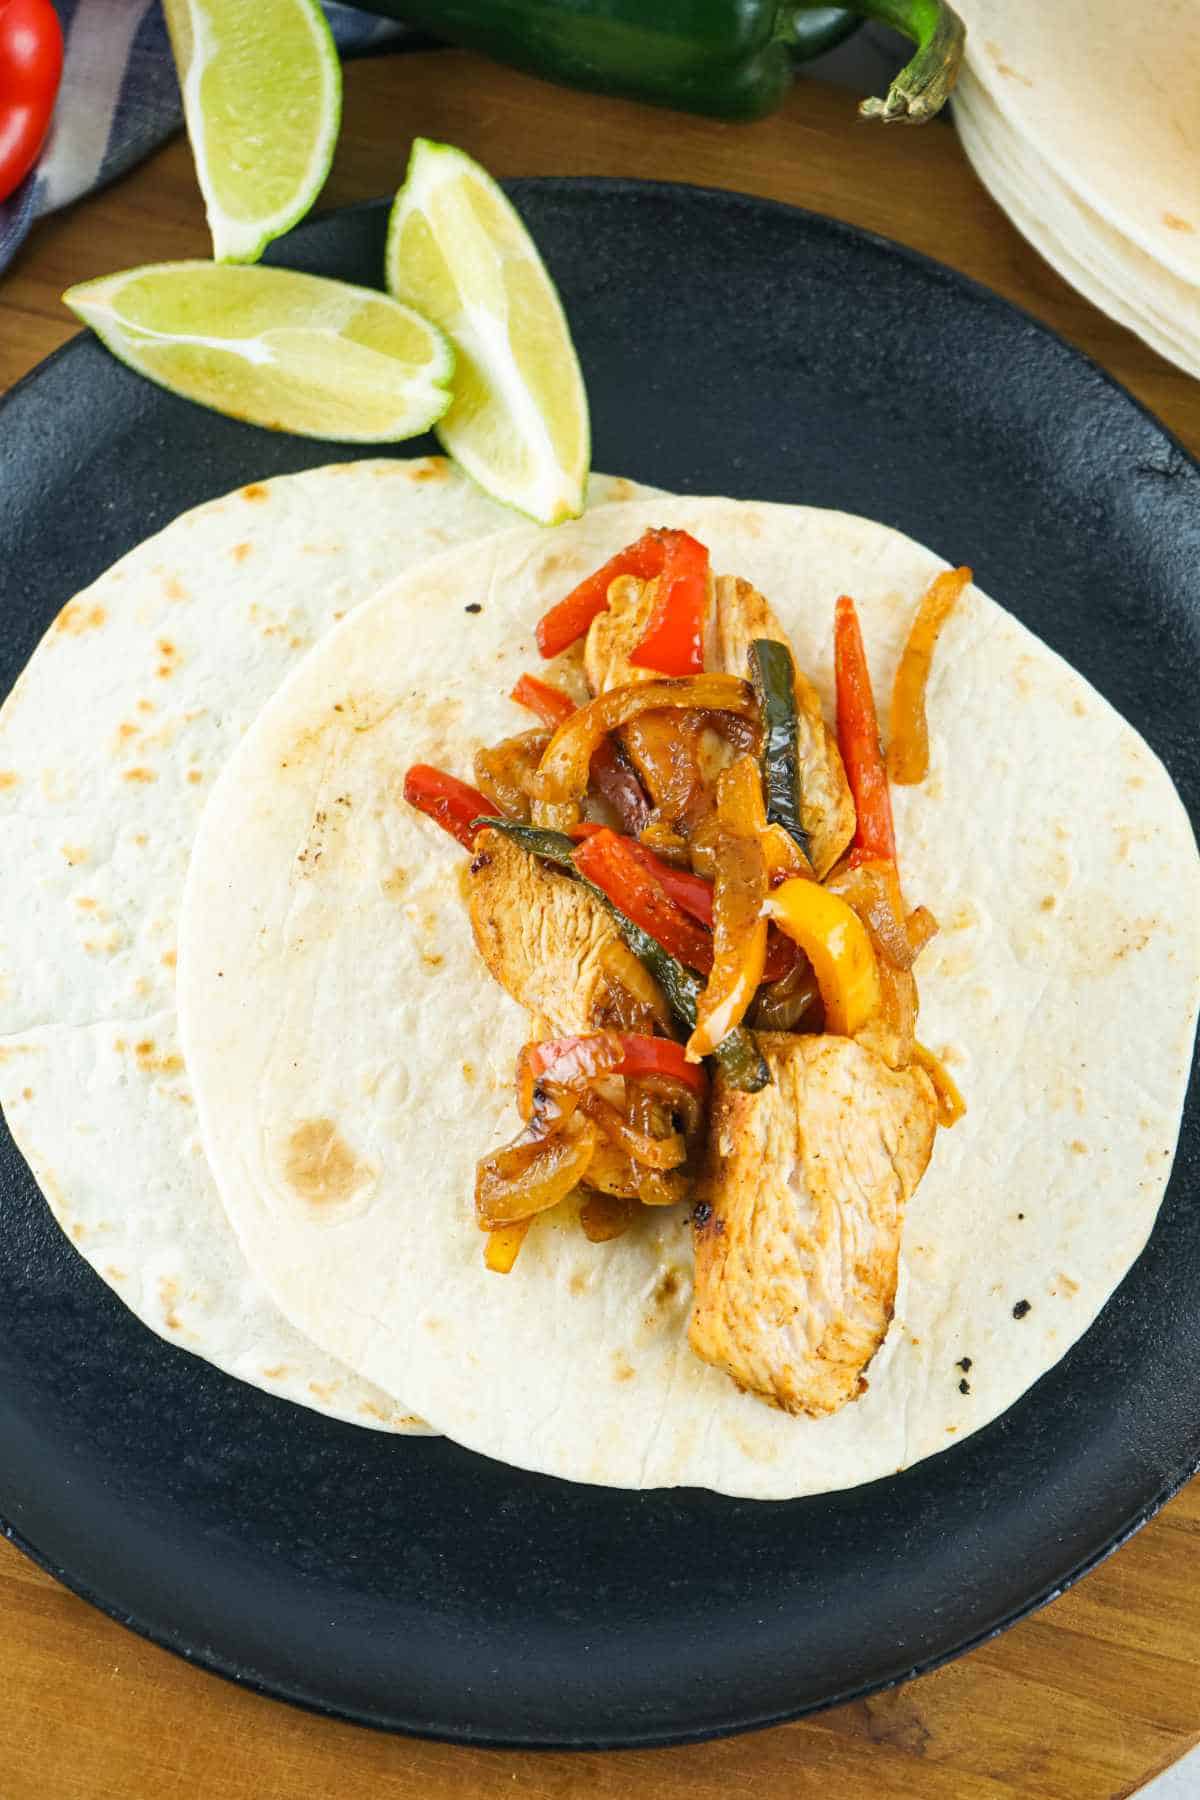 flour tortillas loaded with cooked vegetables and meat.